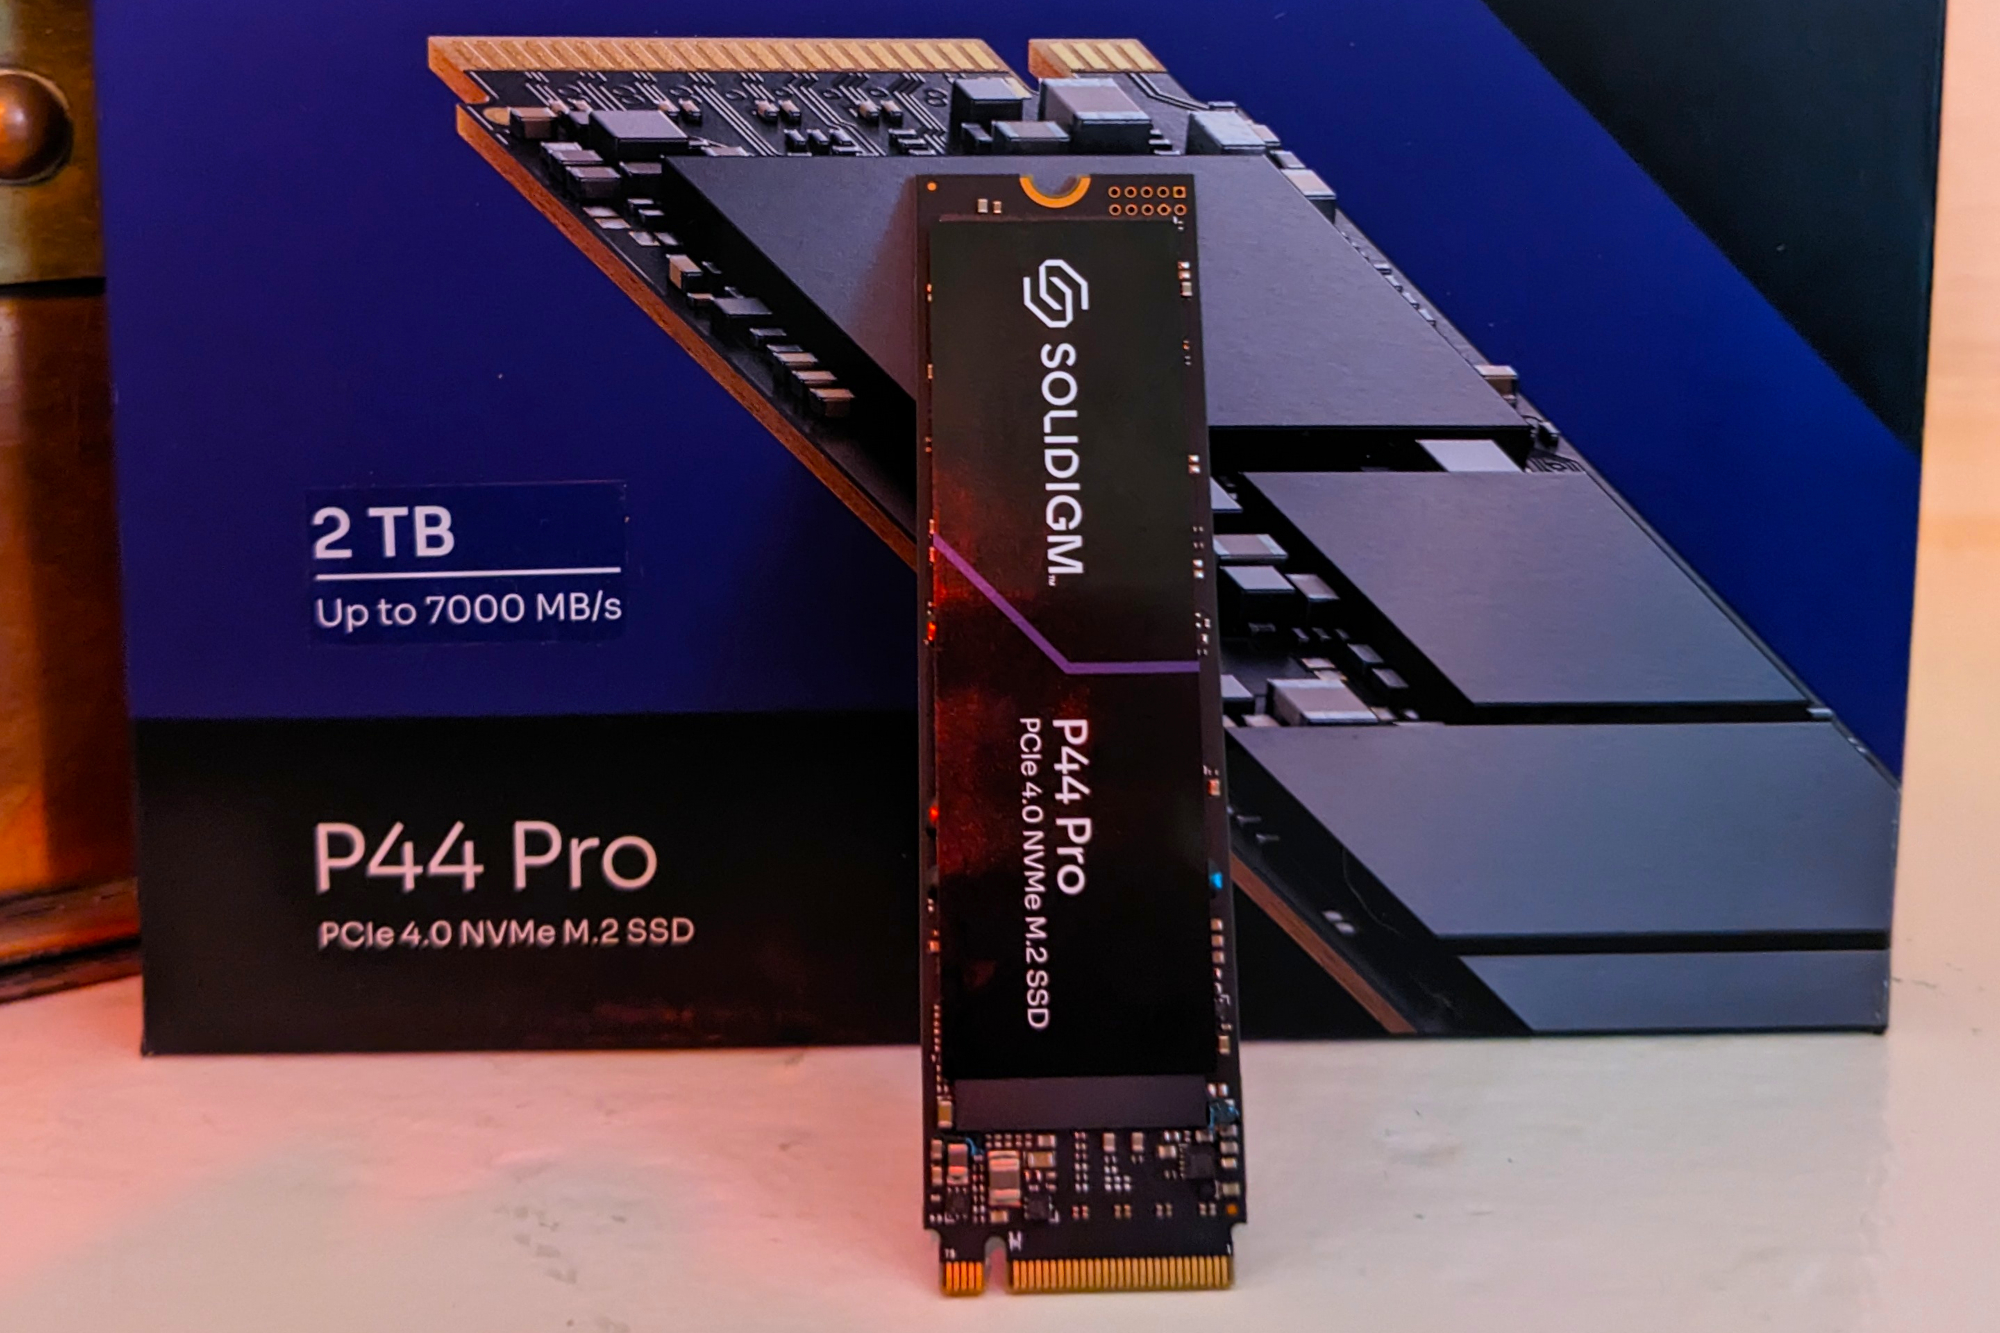 Solidigm P44 Educated SSD - Easiest PCIe 4.0 SSD